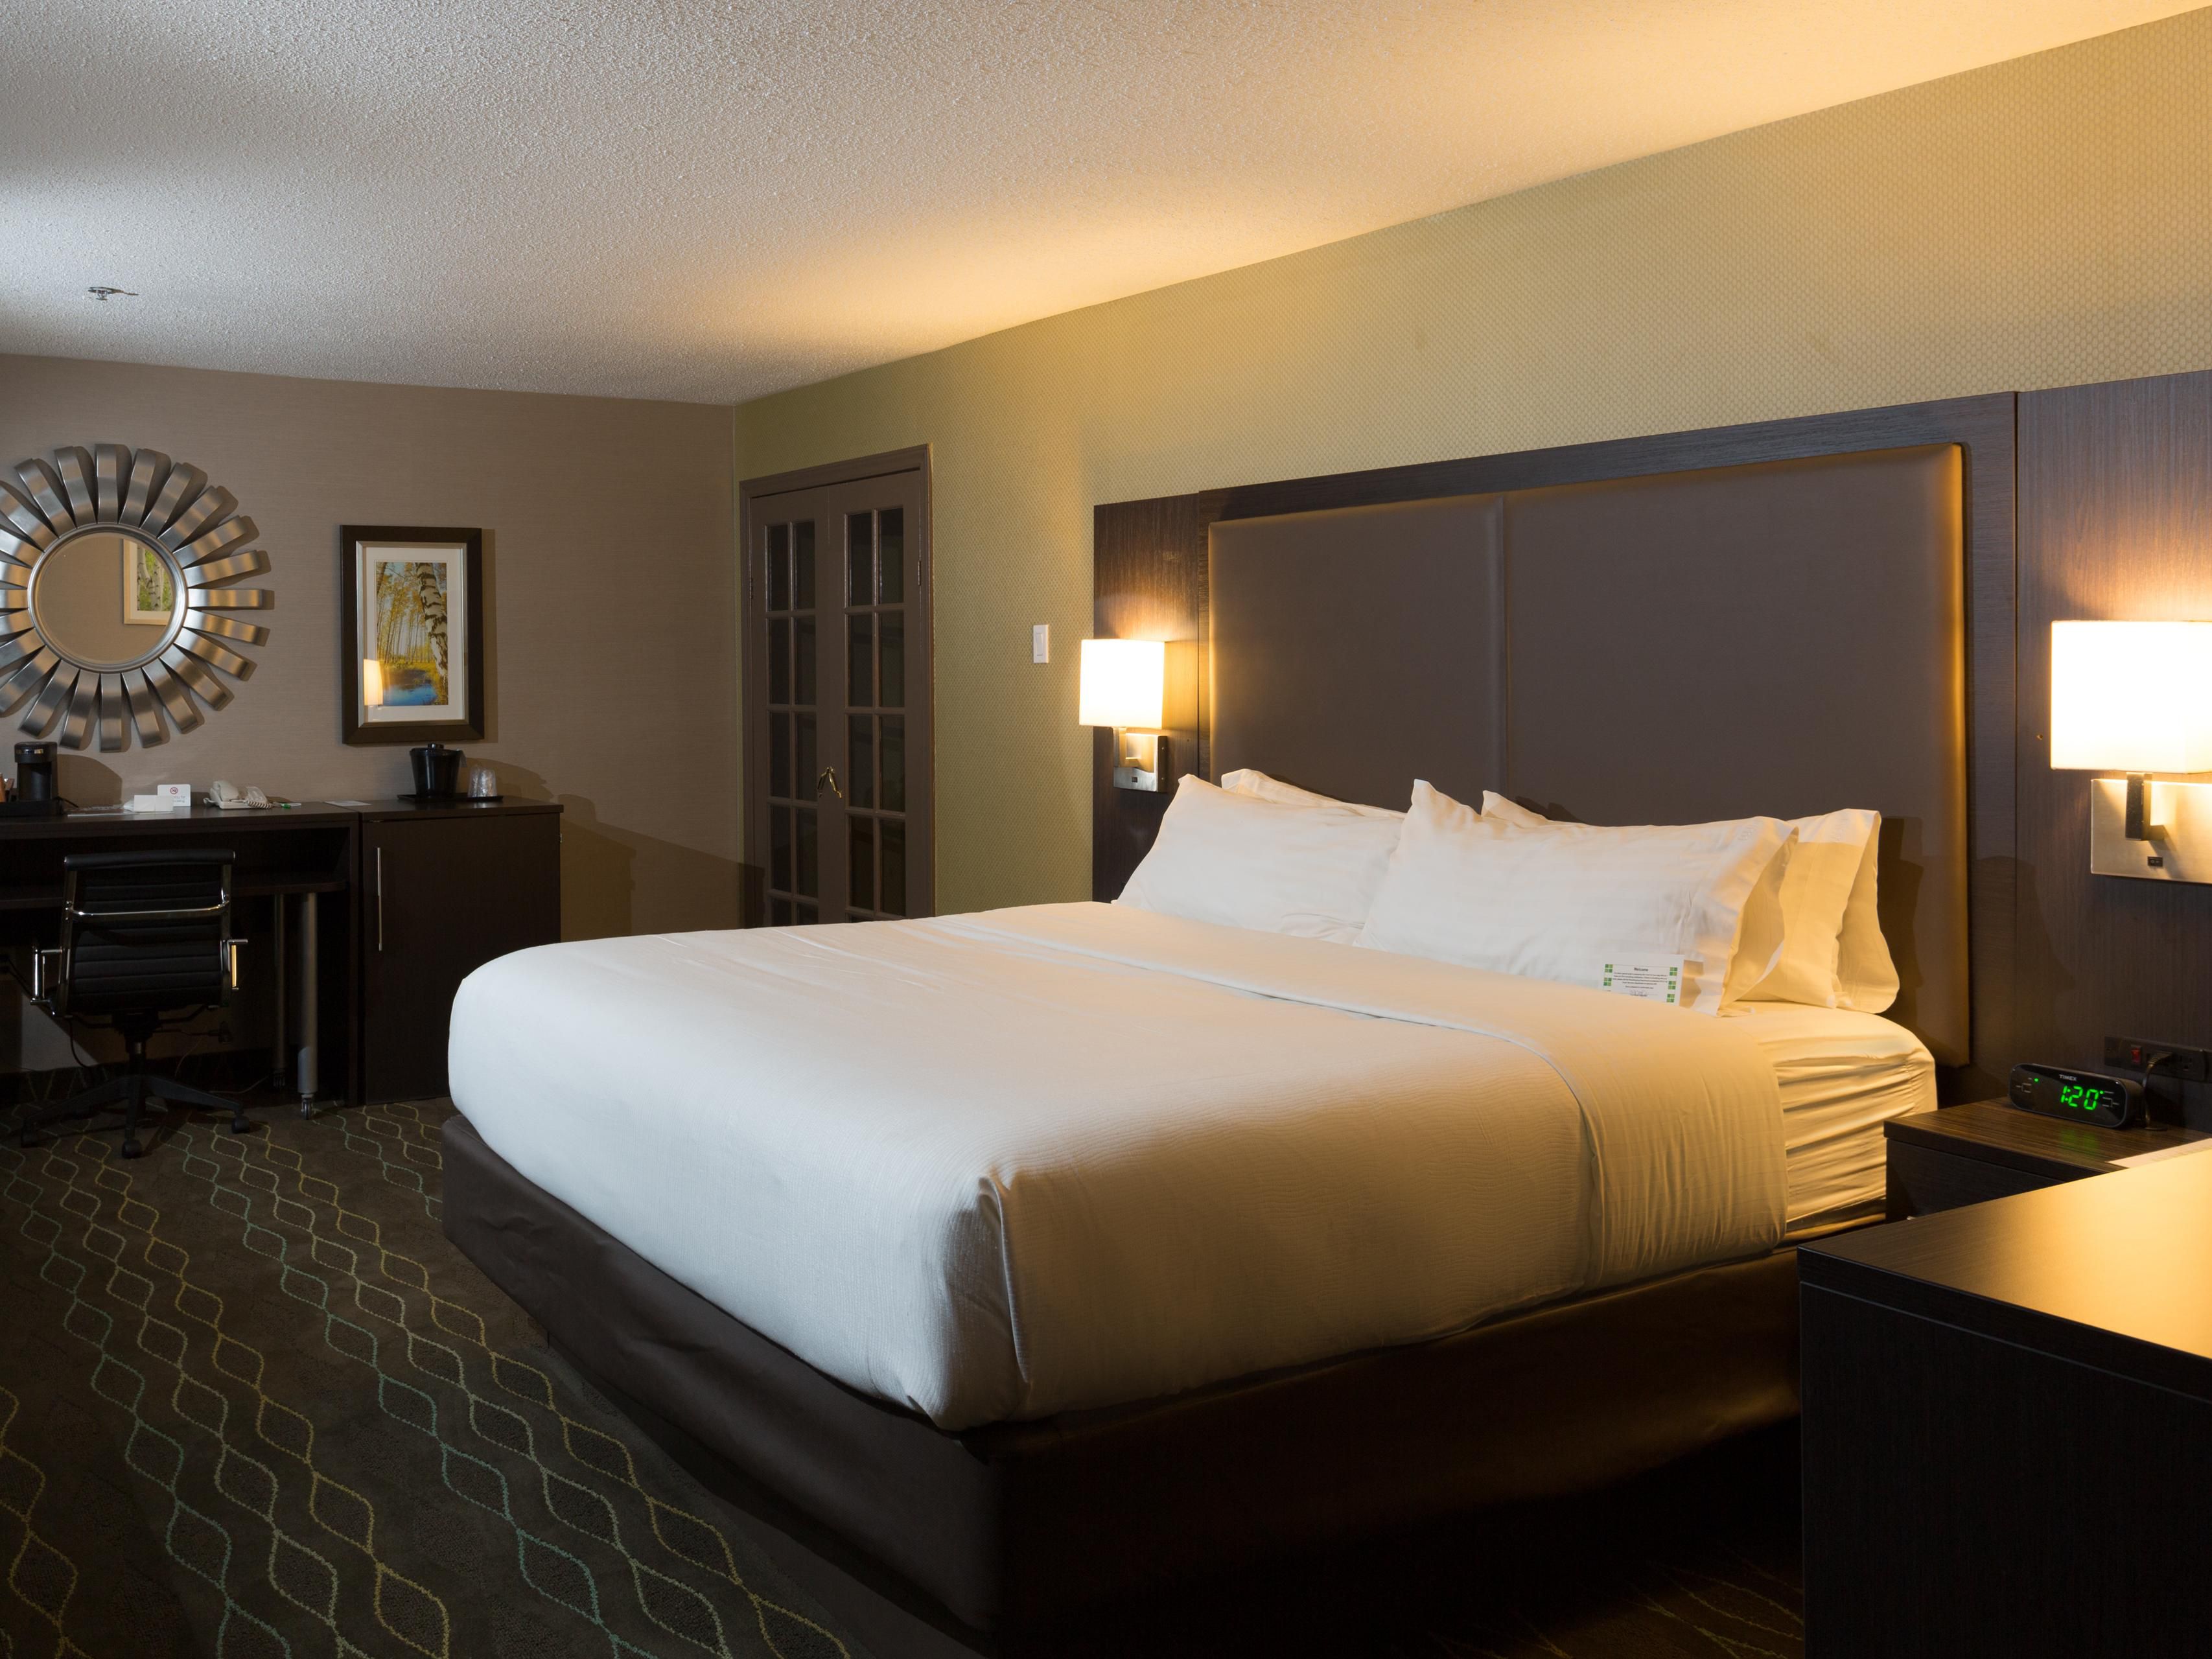 At the Holiday Inn Sudbury, we have a selection of rooms, including King Suites, that are perfect for a longer stay. With complimentary WiFi, onsite guest parking, onsite guest laundry facilities, and more - we've got everything you need to feel at home on the road.